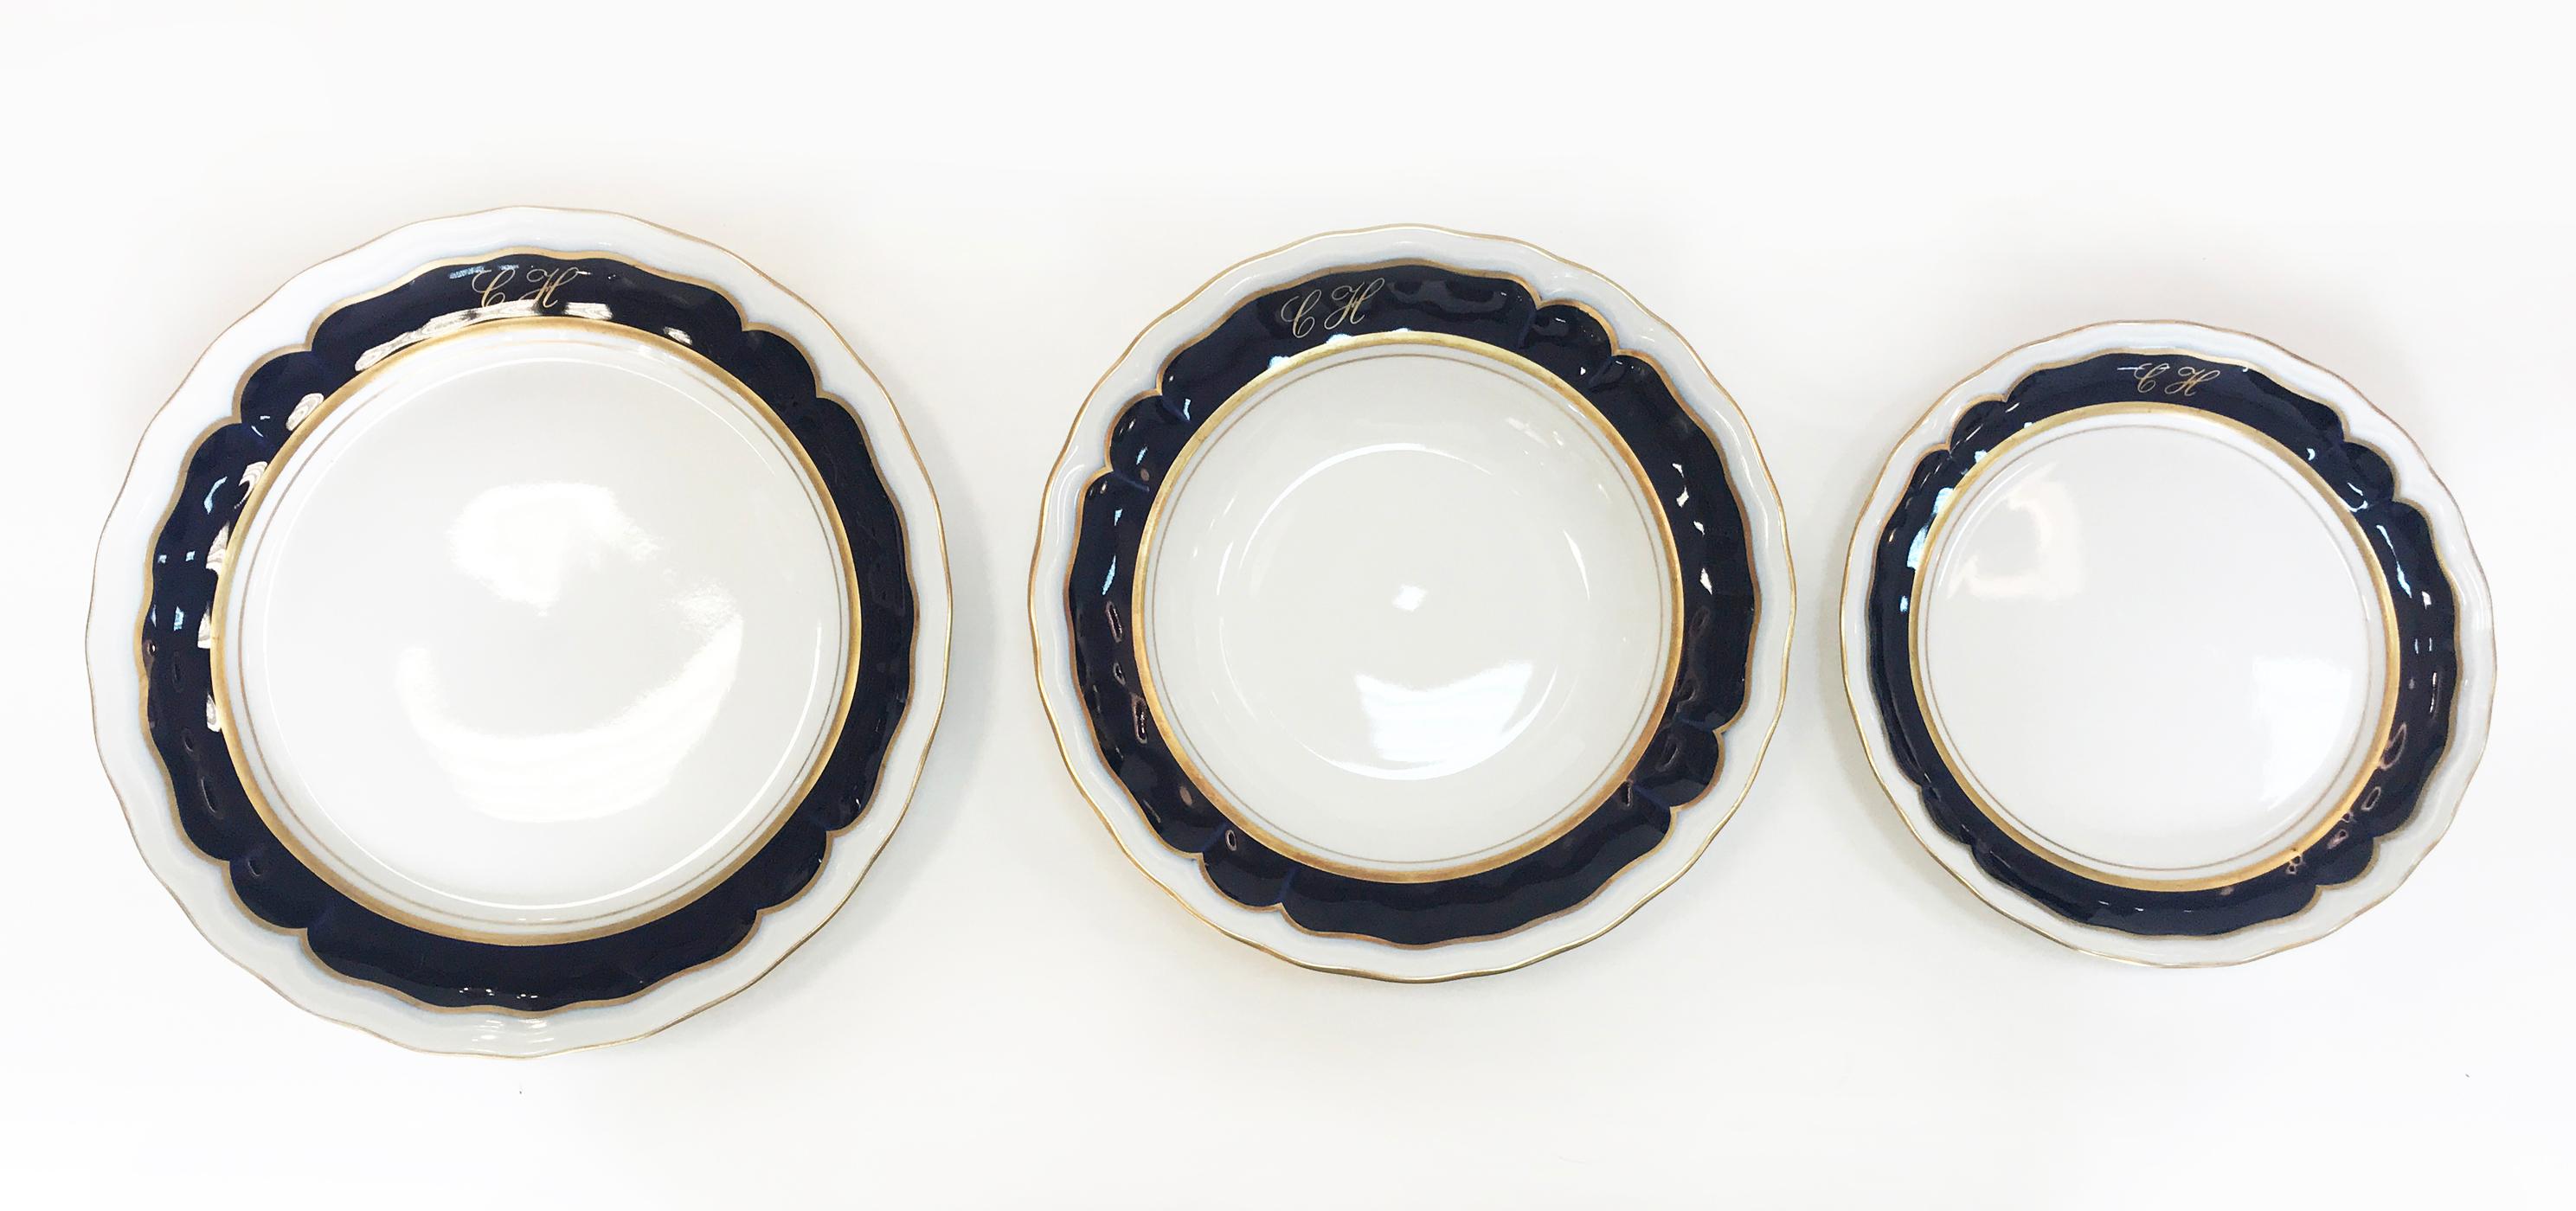 Impressive and unique porcelain dinner set hand decorated with 24k Gold and Cobalt.
This set named king Carlos IV is a limited edition. It is inspired by the royal dinner set from the 18th century manufactured by Porcelanas Buen Retiro, kept in the